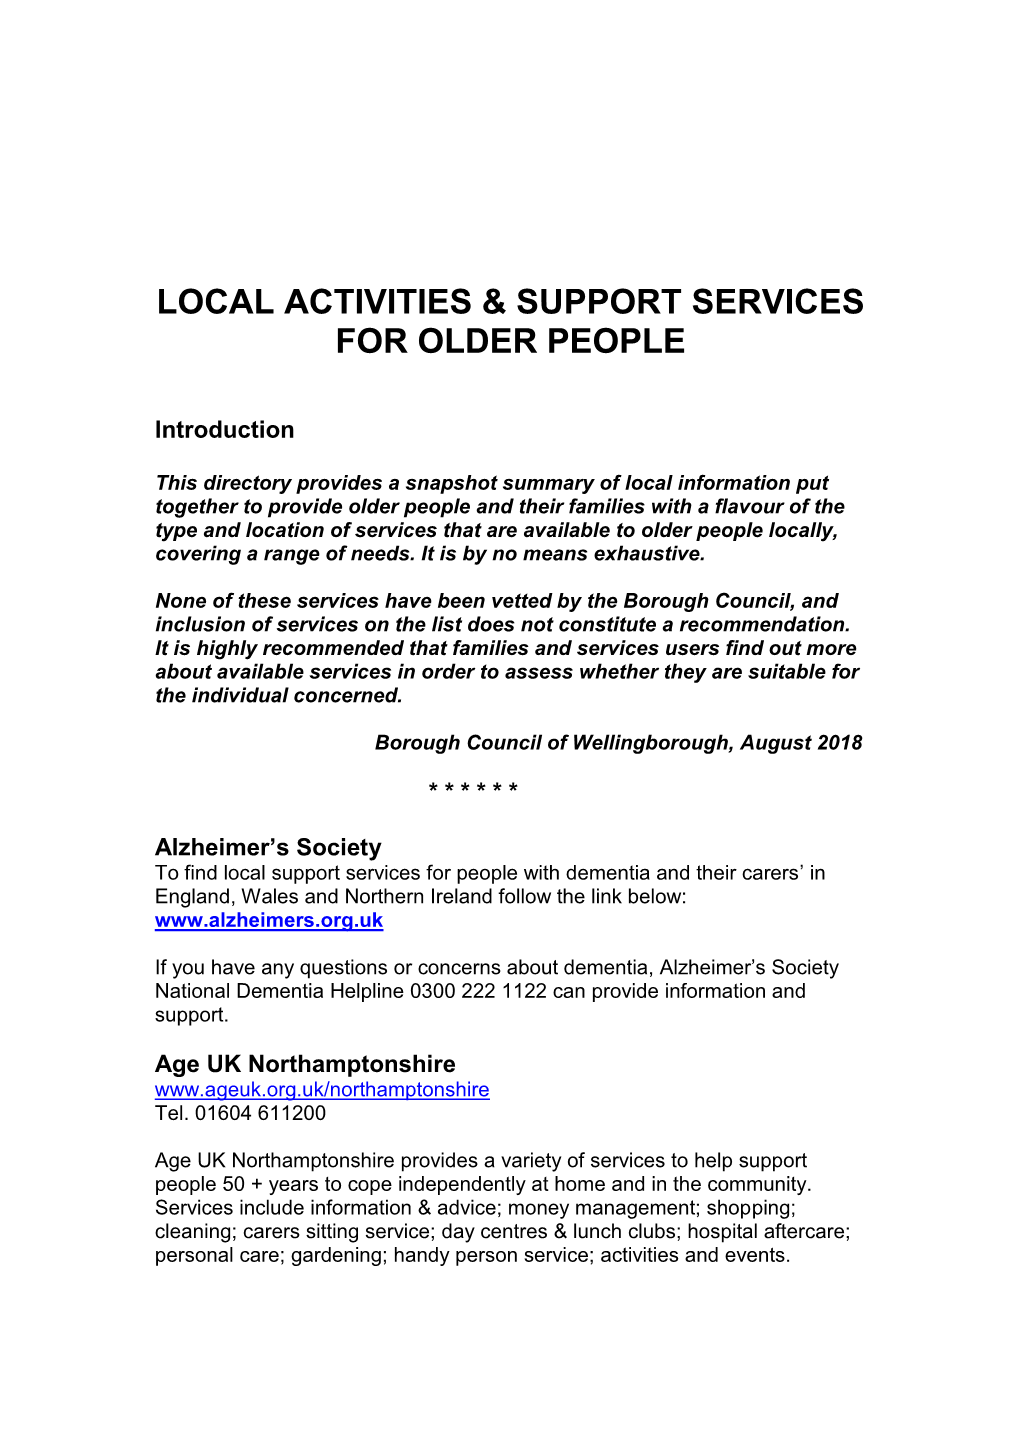 Local Activities & Support Services for Older People